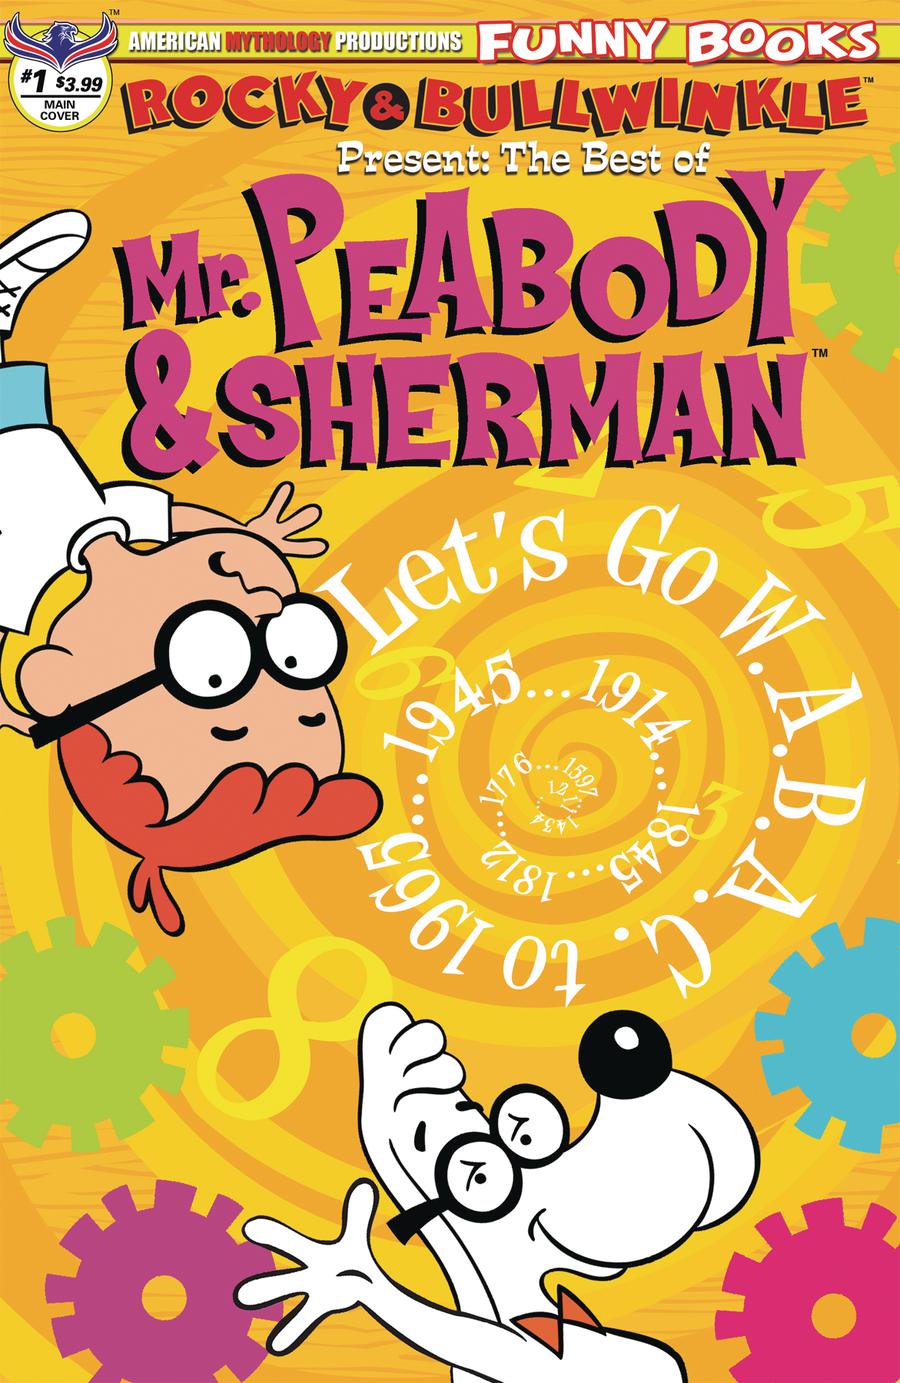 Rocky & Bullwinkle Best Of Mr Peabody & Sherman #1 Cover A Regular Cover